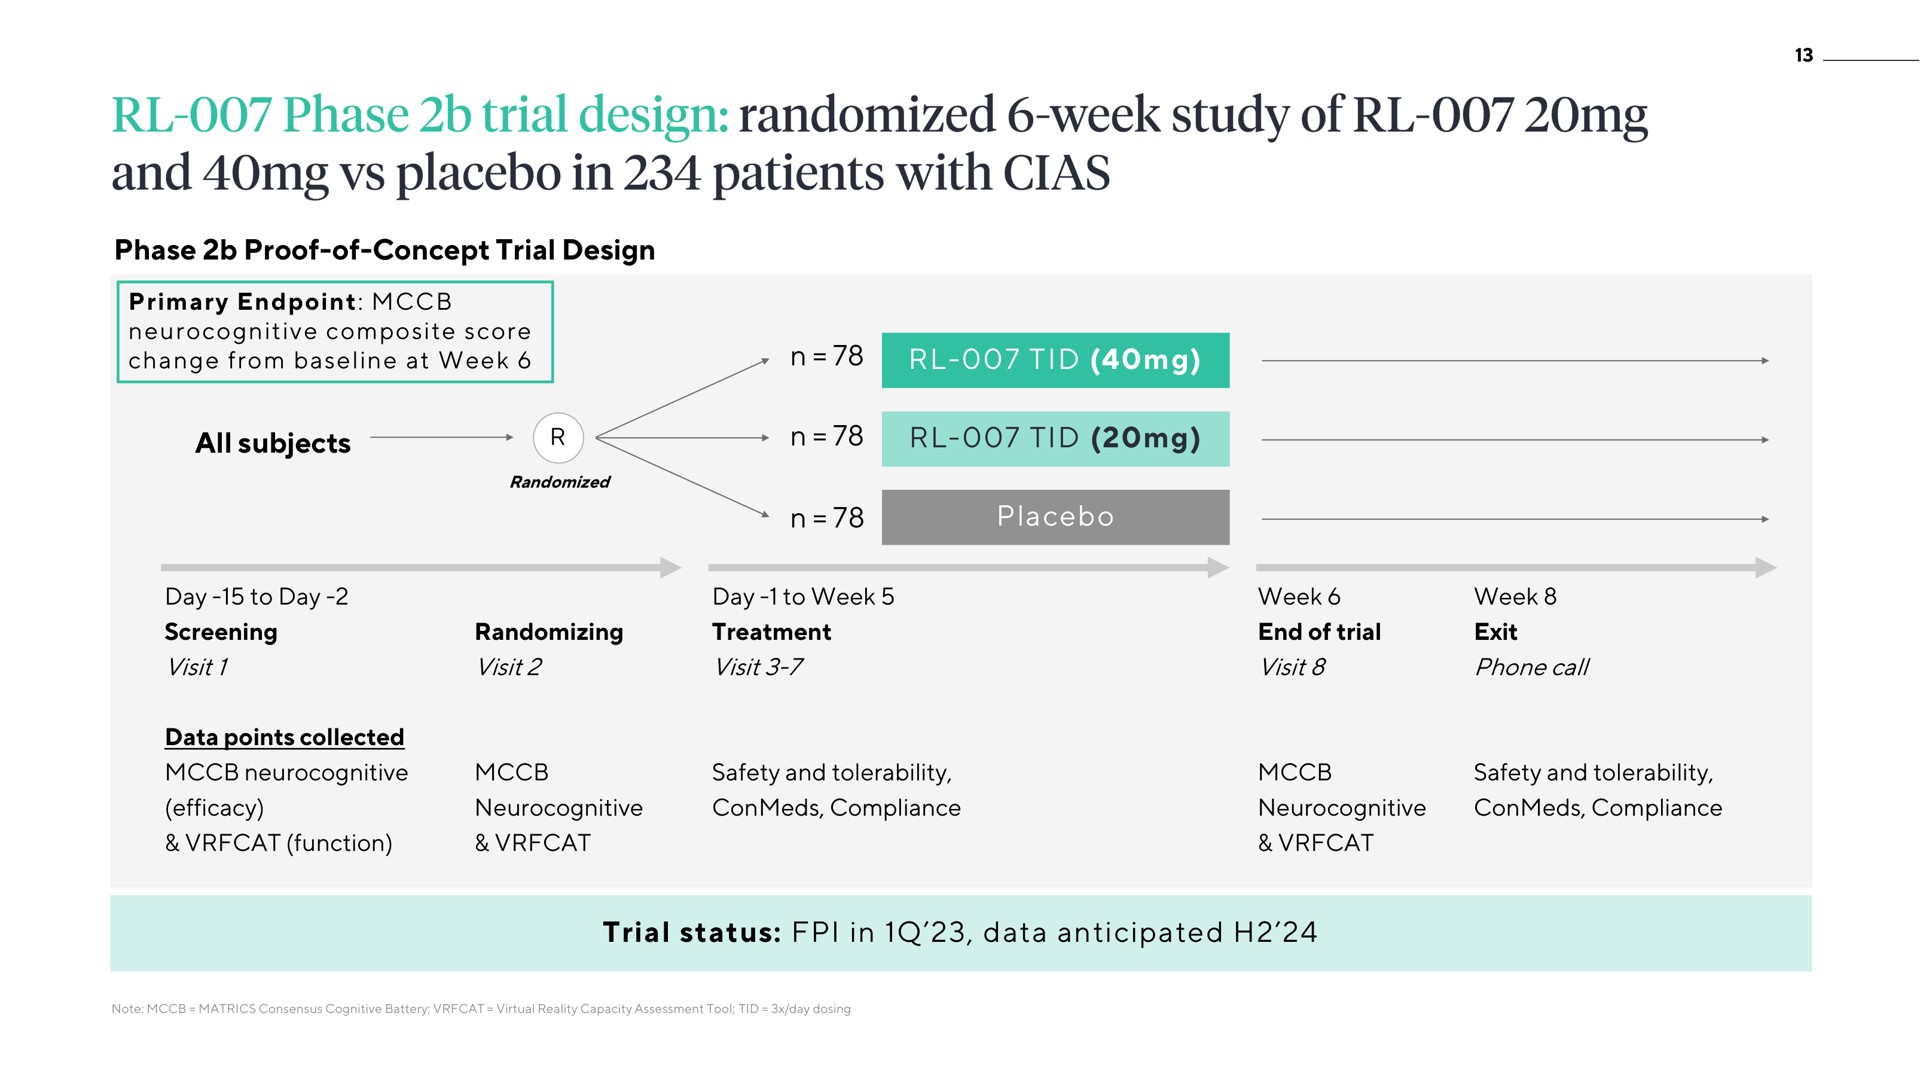 phase proof of concept trial design all subjects tid tid placebo trial status in data anticipated randomized week study of and patients with | ATAI